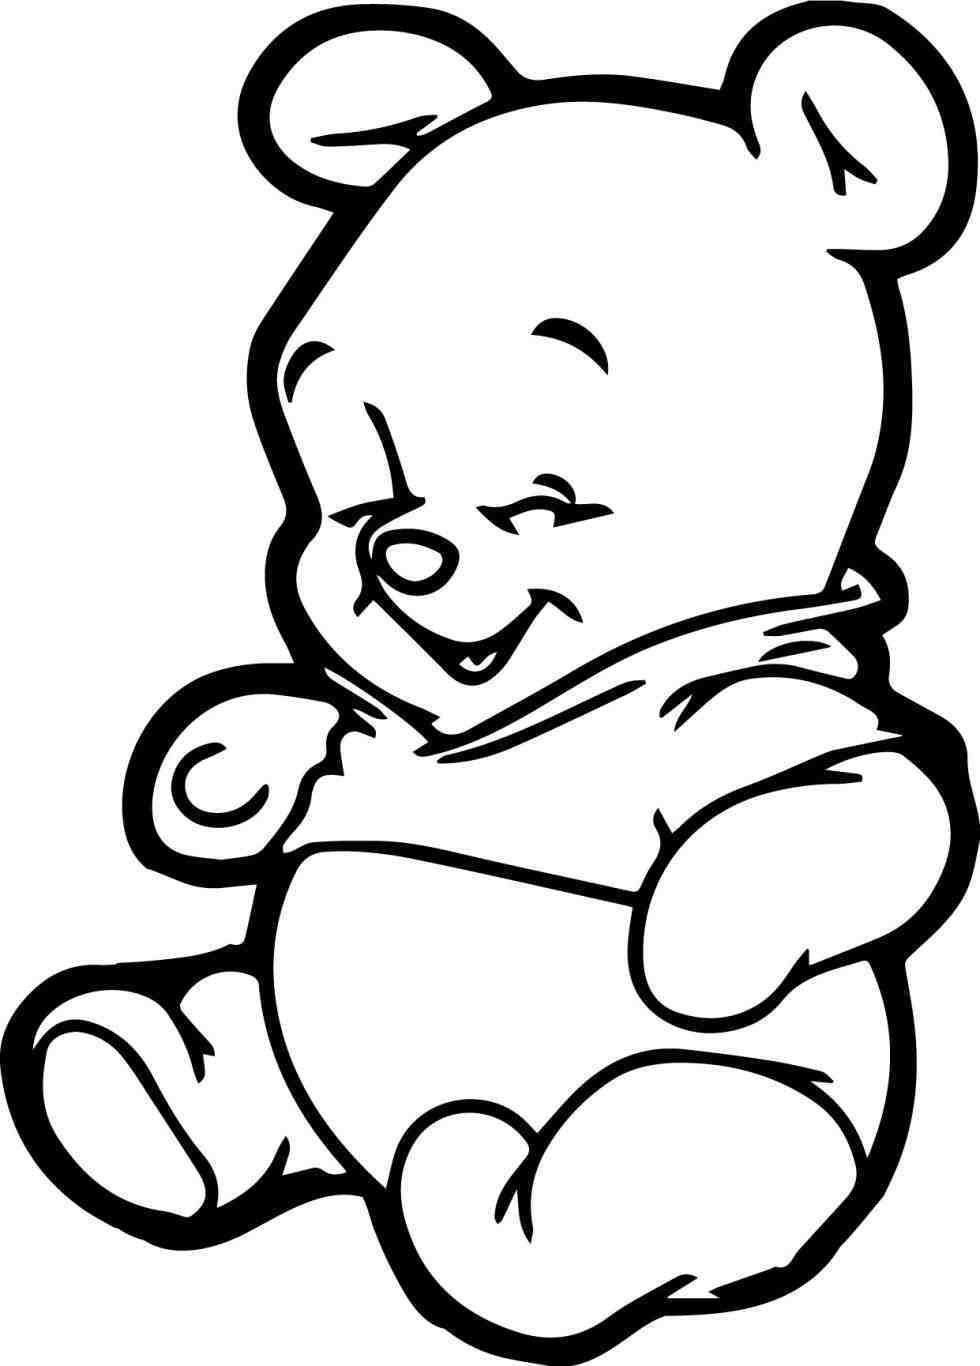 Best How To Draw A Pooh Of All Time The Ultimate Guide Howtodrawplanet4 